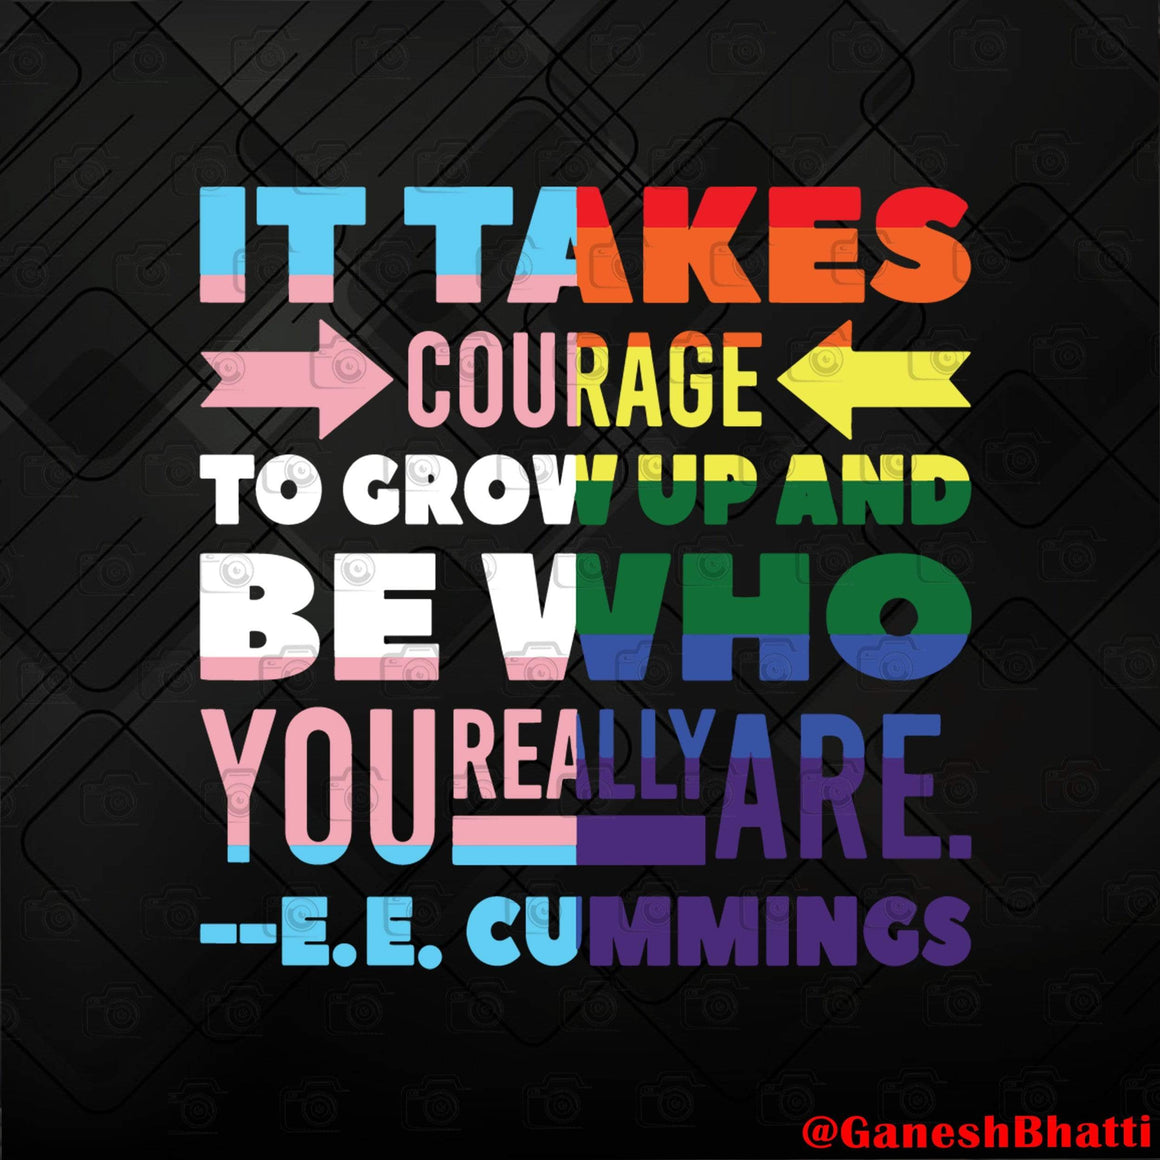 It takes courage to grow up and be who you really are, E.E Cummings, E ...